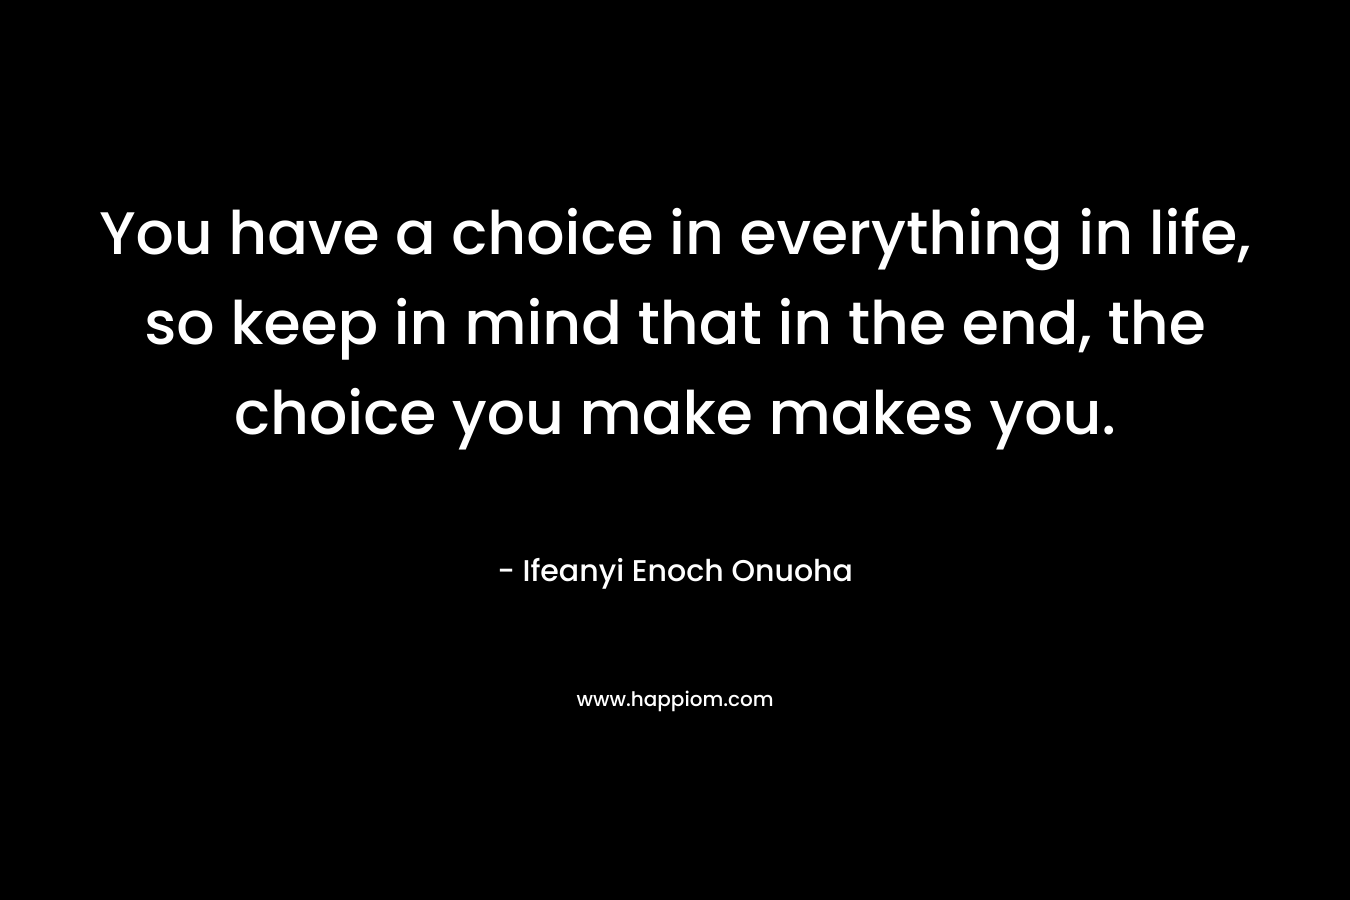 You have a choice in everything in life, so keep in mind that in the end, the choice you make makes you.